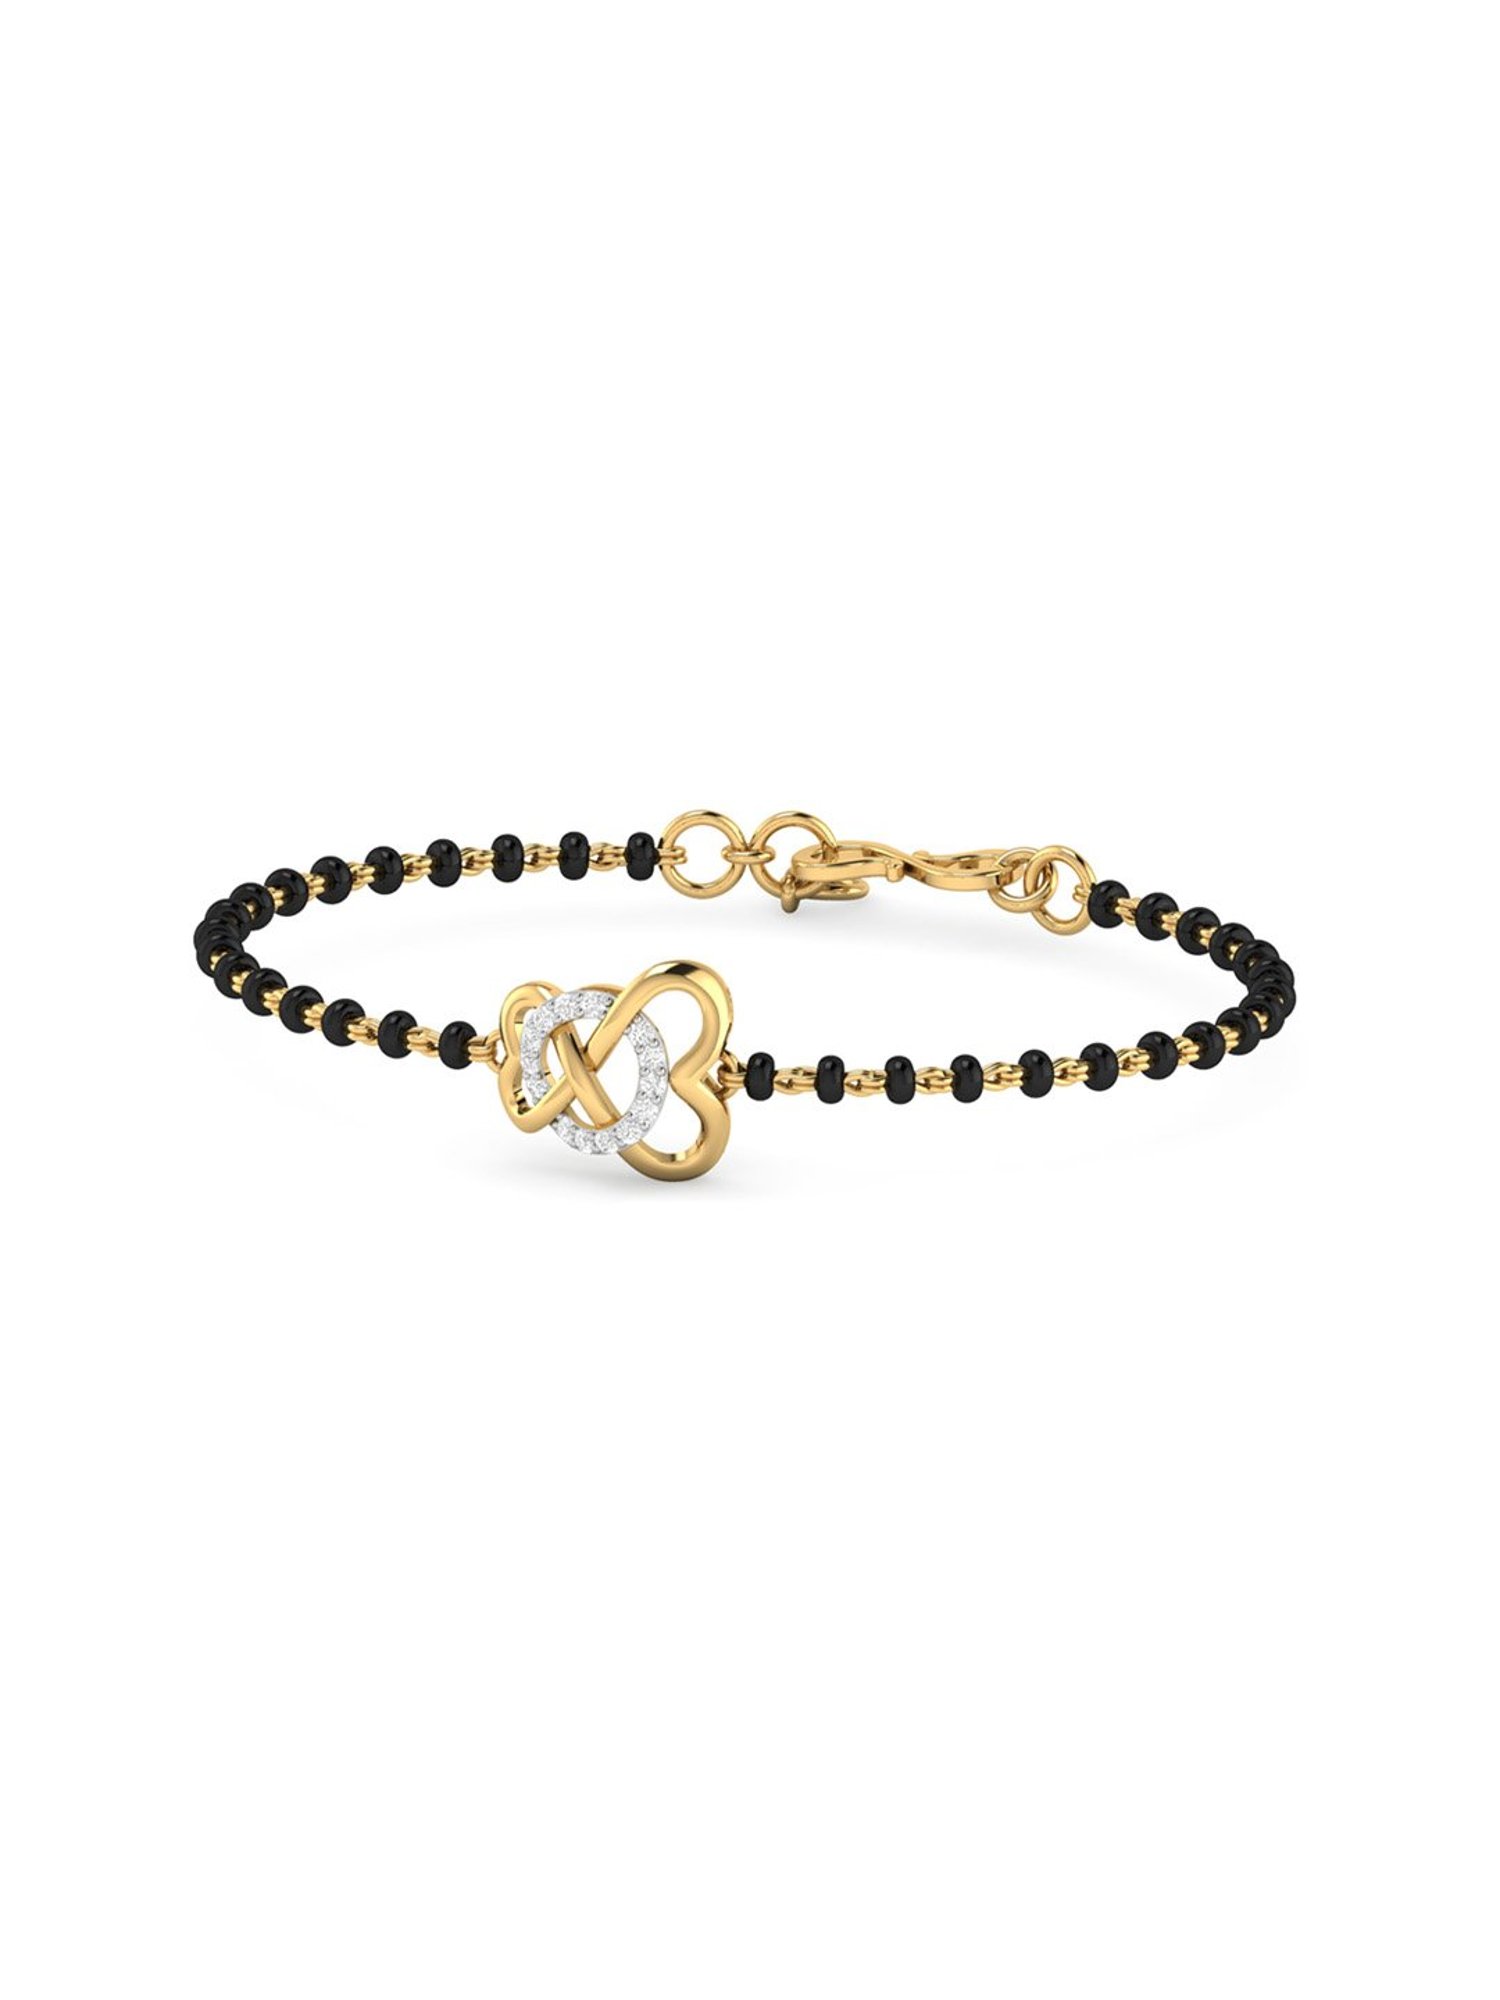 Mangalsutra Bracelet  Buy Mangalsutra Bracelet Online Starting at Just  122  Meesho